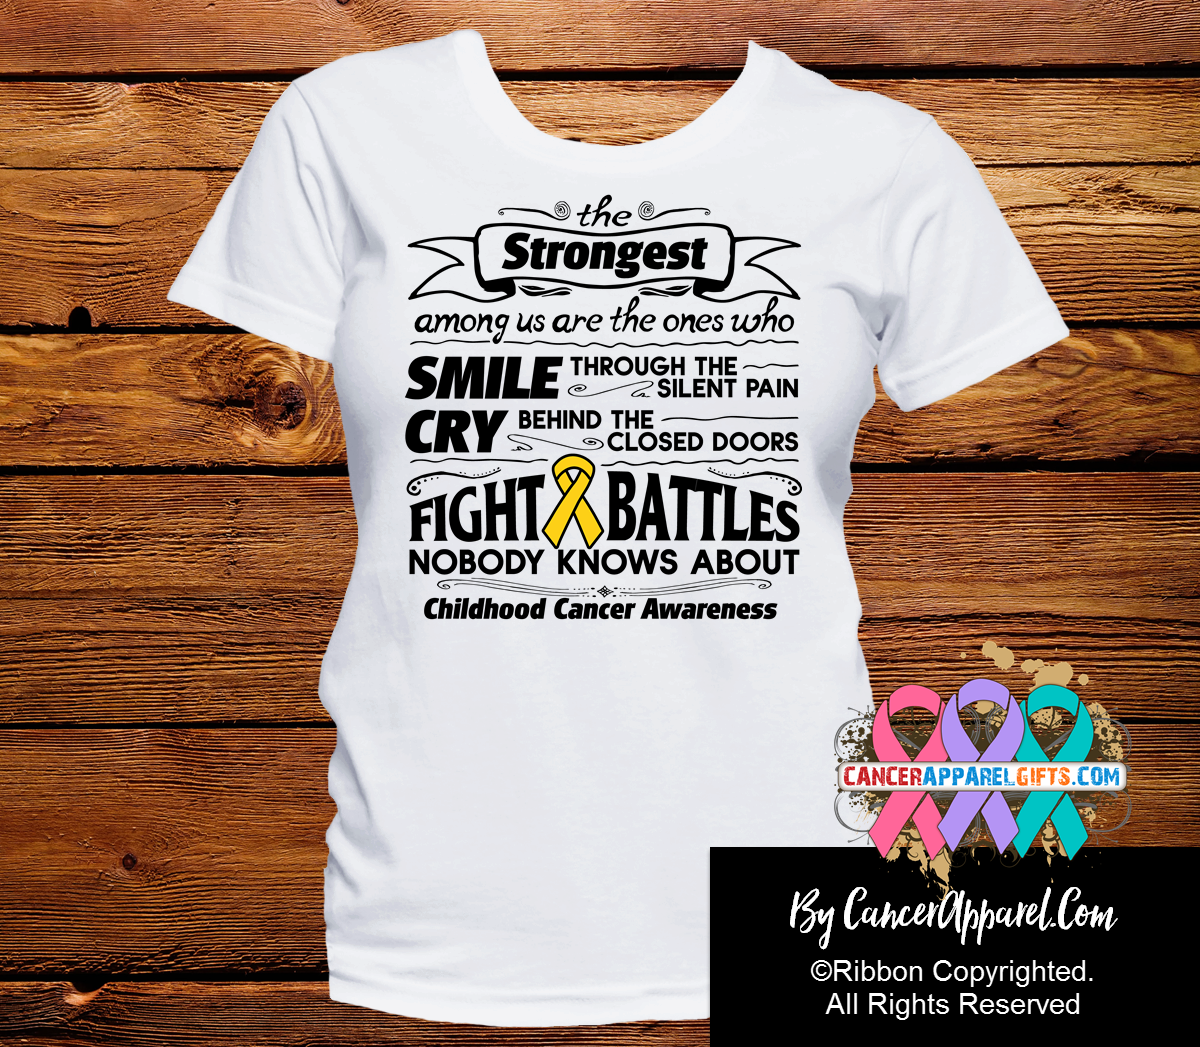 Childhood Cancer The Strongest Among Us Shirts - Cancer Apparel and Gifts